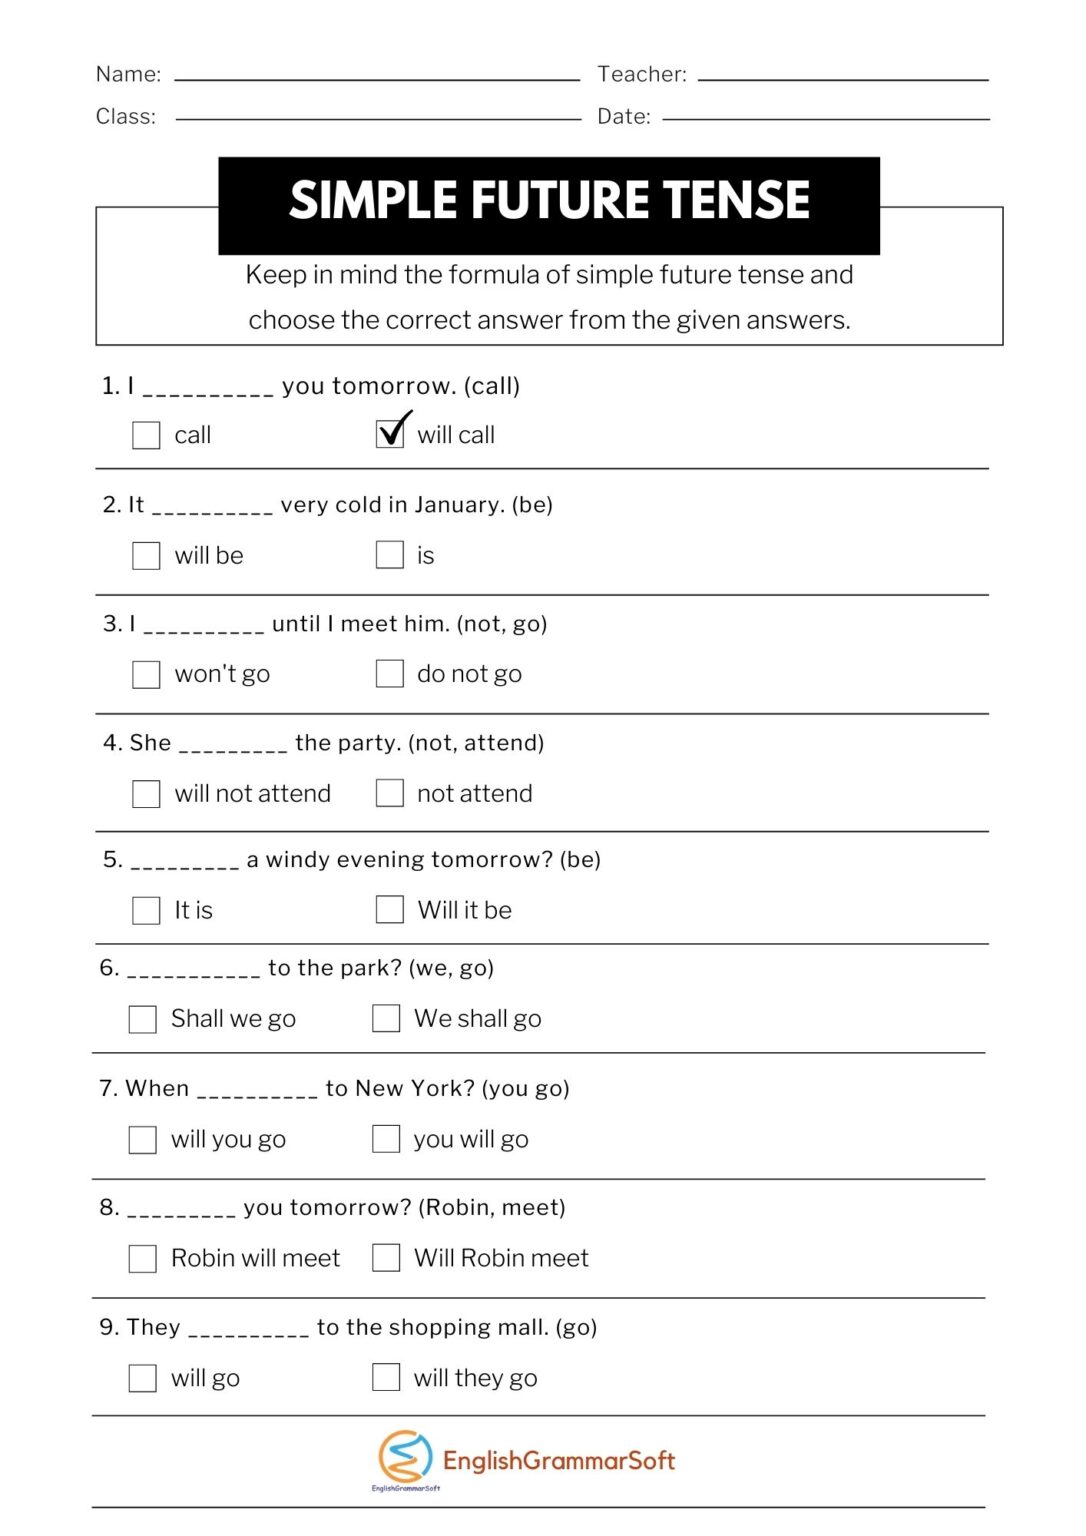 future-perfect-continuous-tense-worksheets-with-answers-future